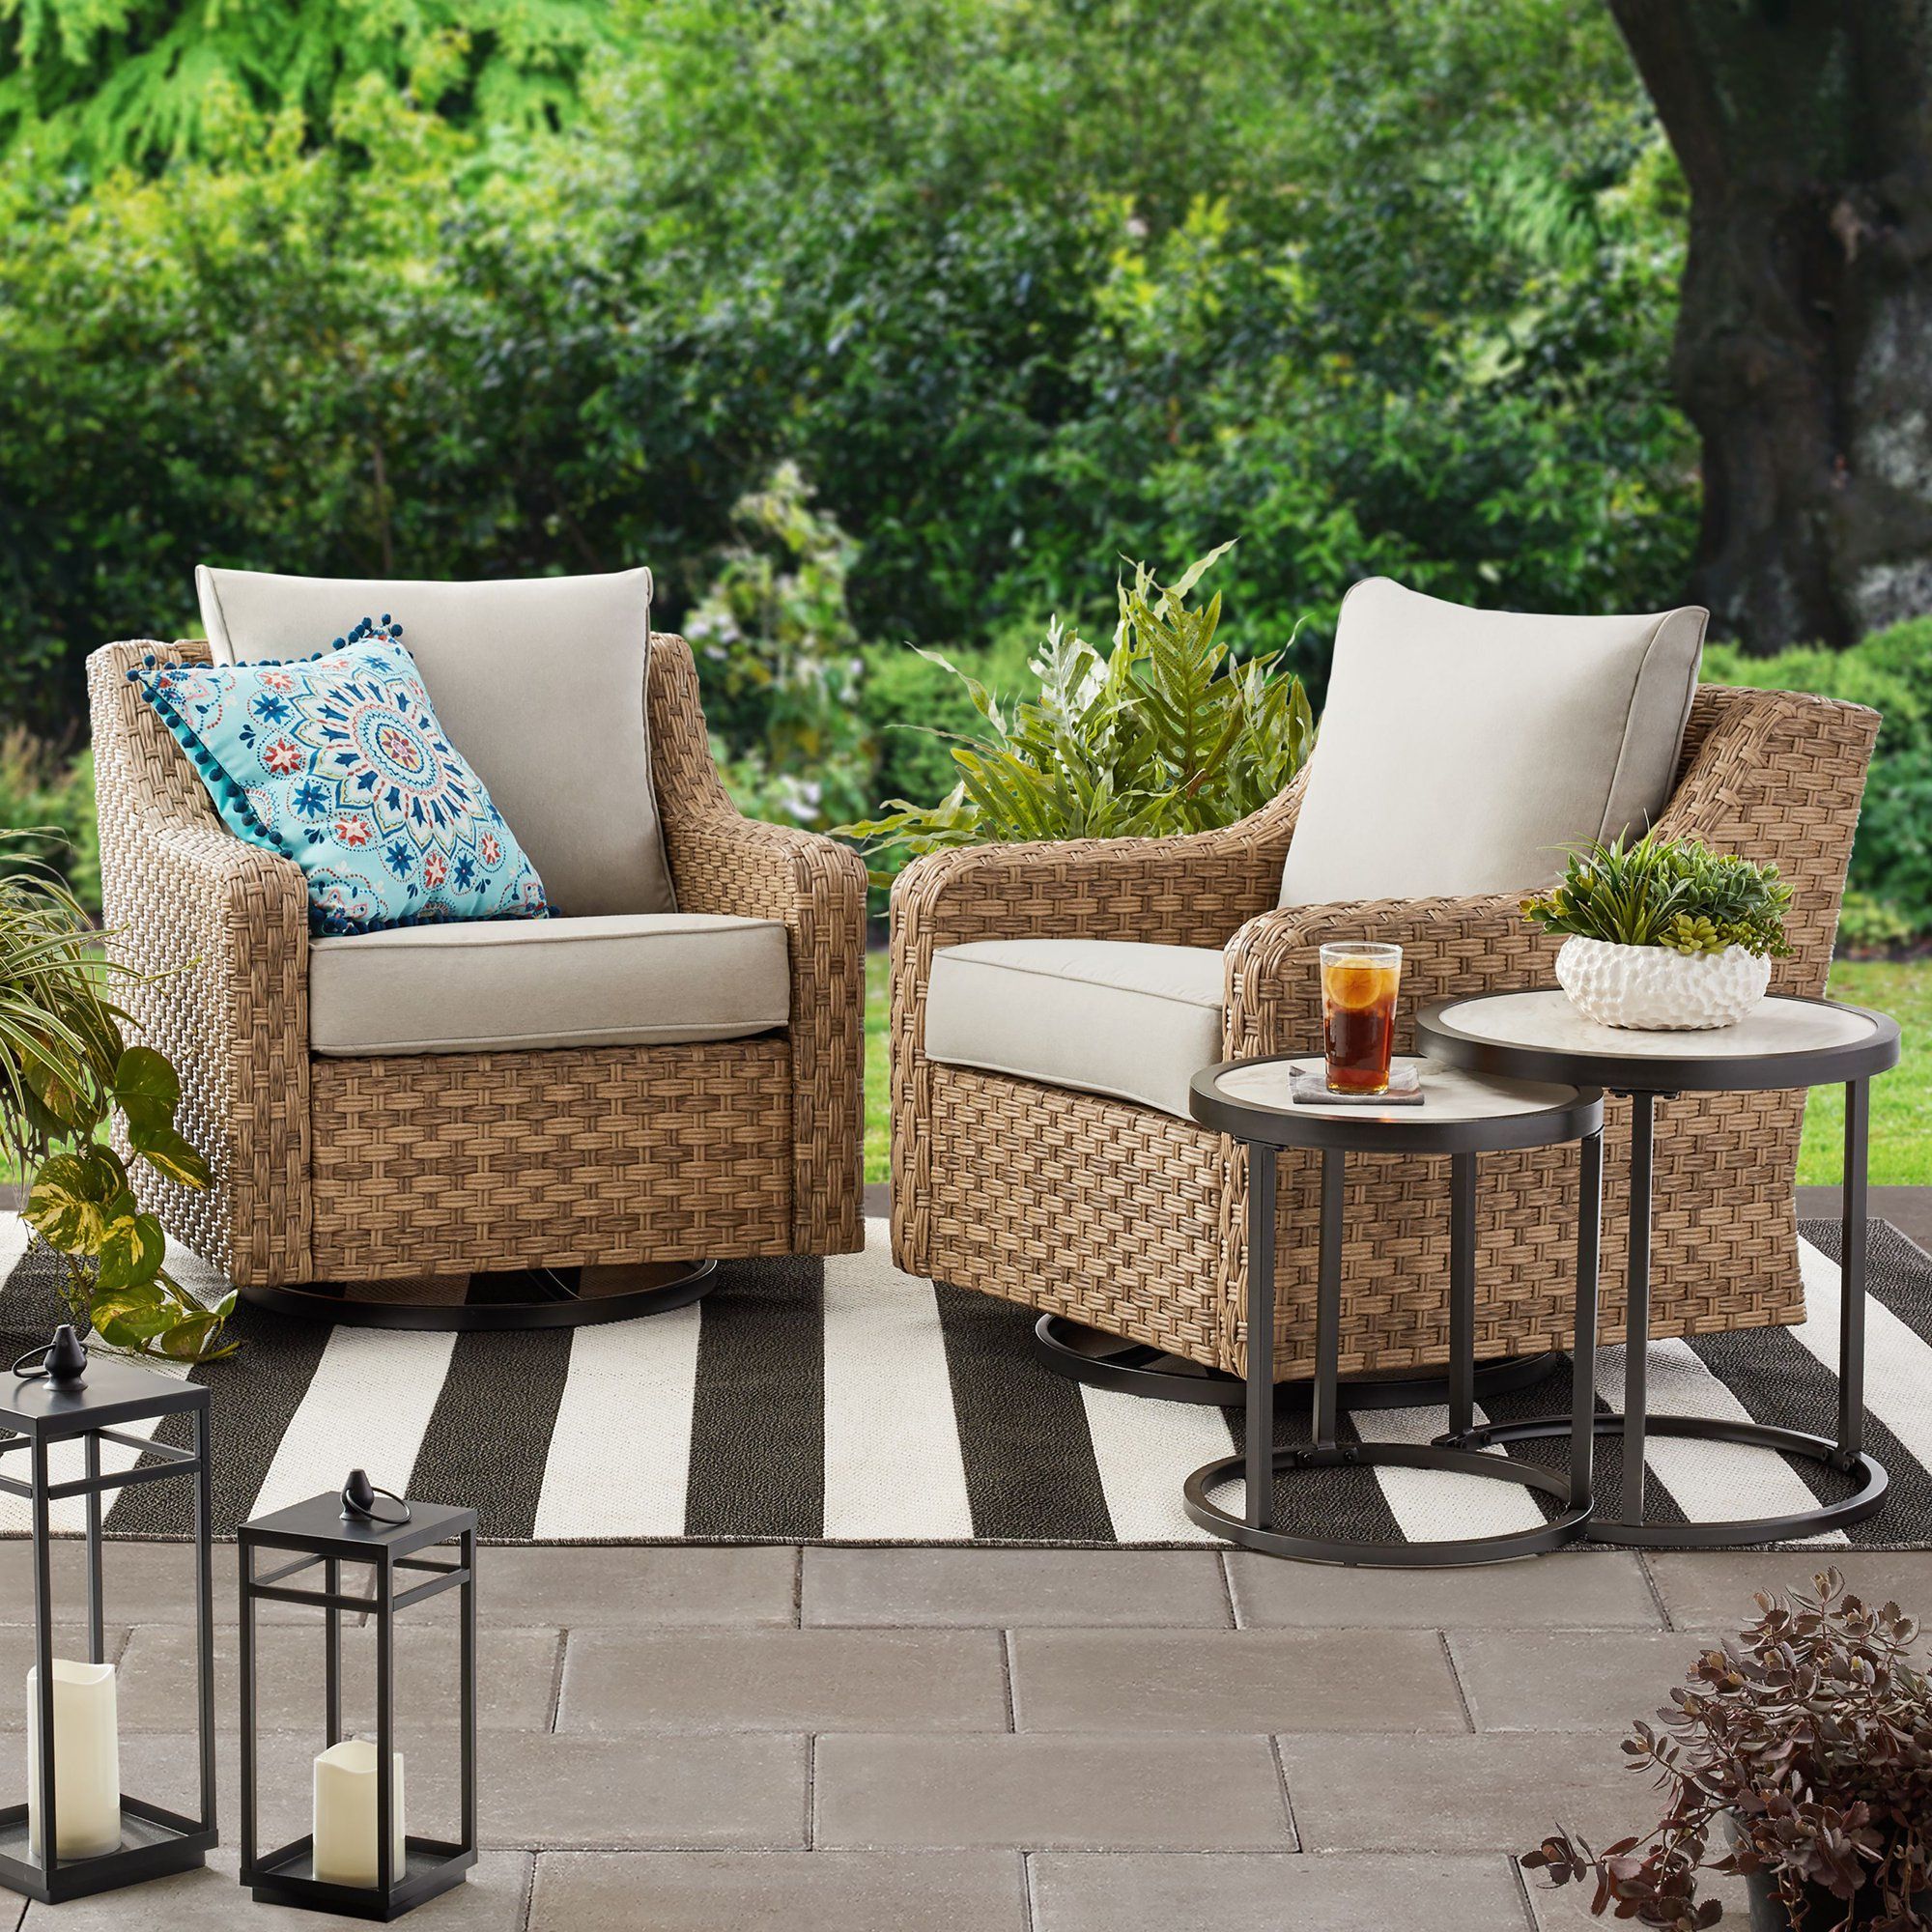 Better Homes & Gardens River Oaks 2 Piece Swivel Glider With Patio Cover –  Walmart | Patio Furniture Sets, Garden Patio Furniture, Conversation Set  Patio Intended For Oaks Table Set With Patio Cover (View 6 of 15)